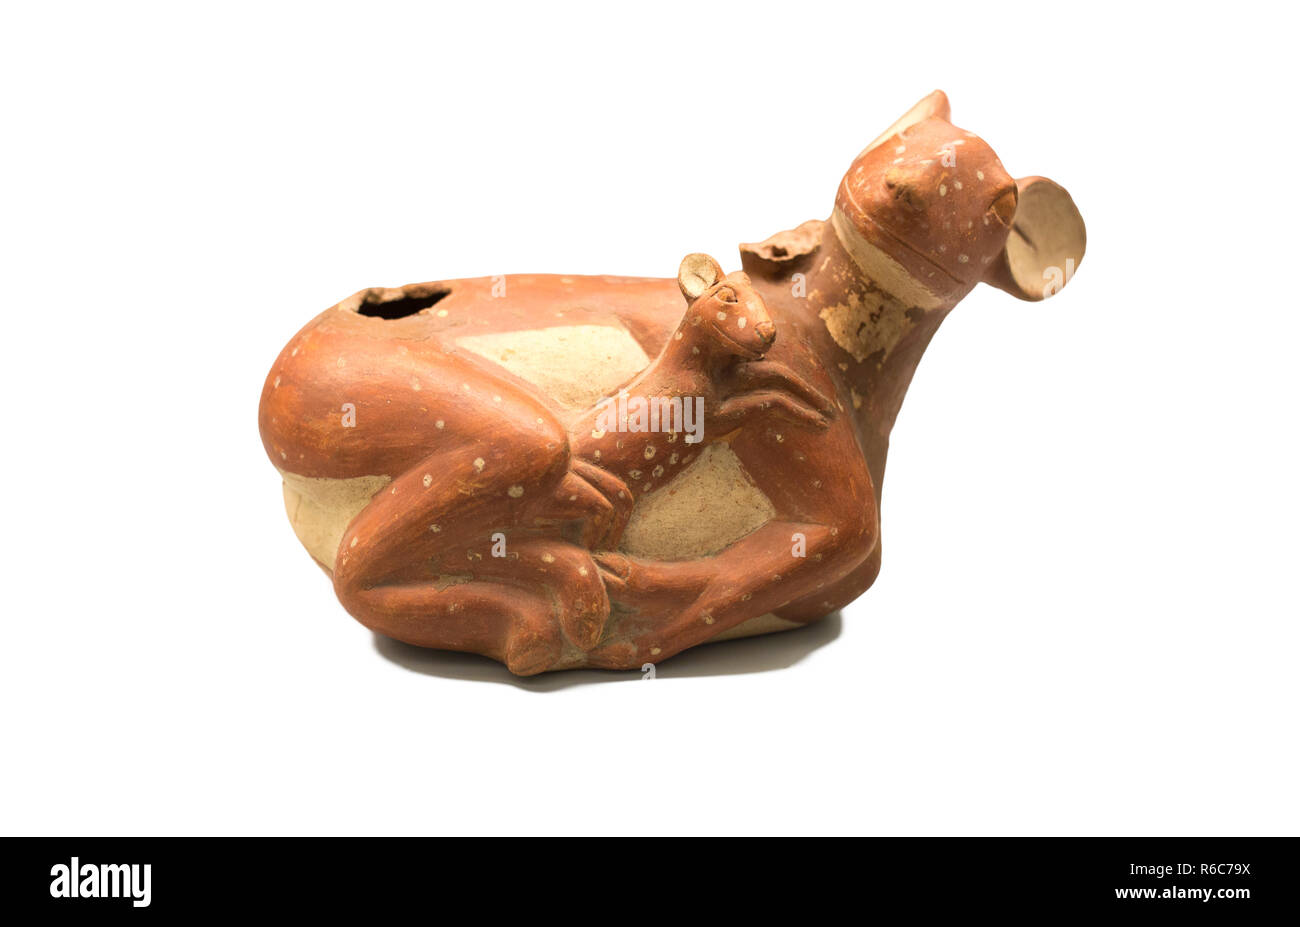 Madrid, Spain - Sept 8th, 2018: Sculptural vessel depicting a deer with her young, Moche culture, ancient Peru.Museum of the Americas, Madrid, Spain Stock Photo